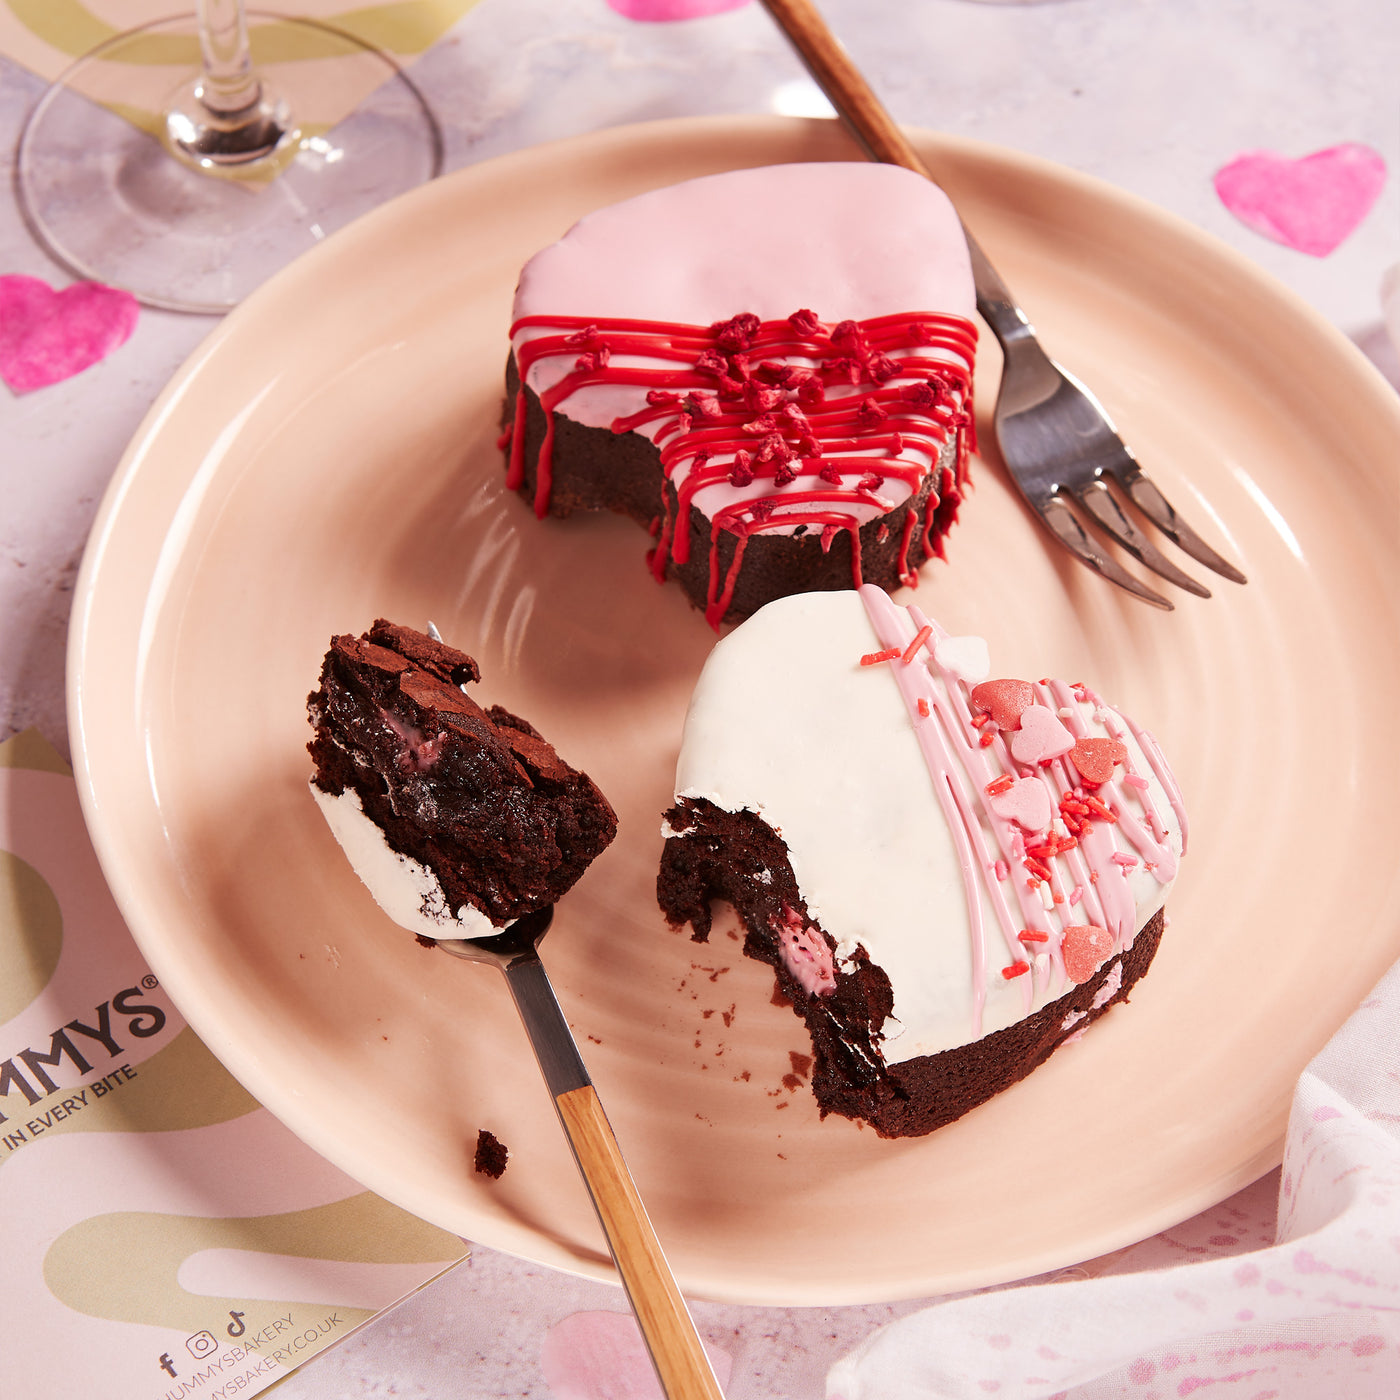 Valentines Heart Shaped Postal Brownie Box - Delivered To Your Door